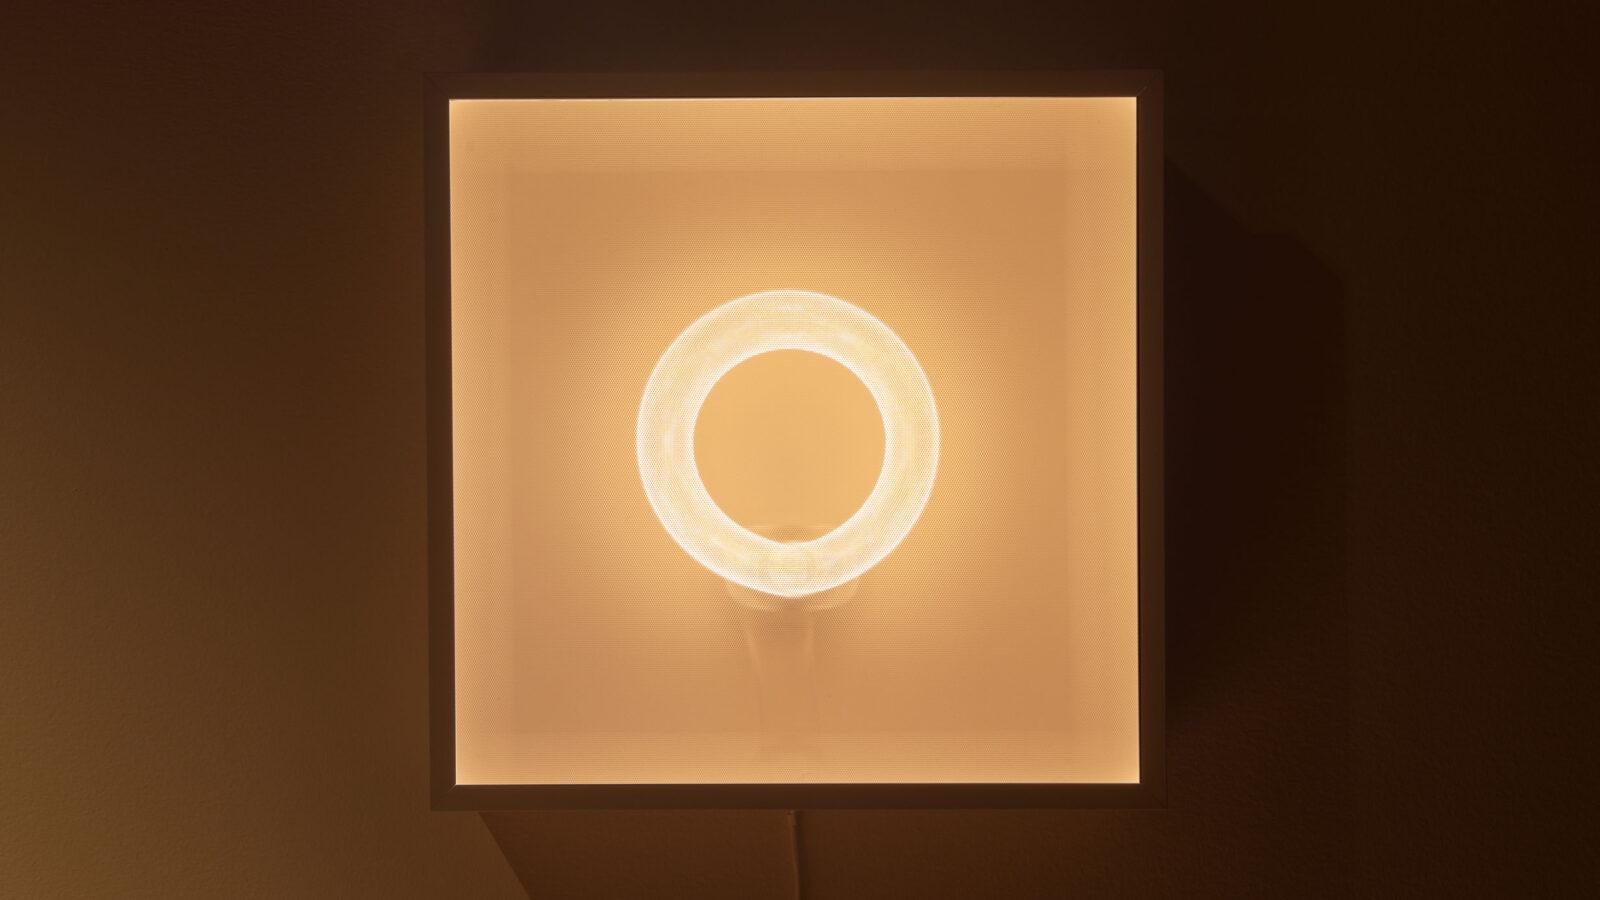 Lightpulse wall lamp by Studio Lampent
Dimensions: D 53 x W 53 x H 13
Materials: Acrylic, wood. 
Weight: 4,5 kg.
Customizable frame wood type (oak, ash, birch, etc) and color.

All our lamps can be wired according to each country. If sold to